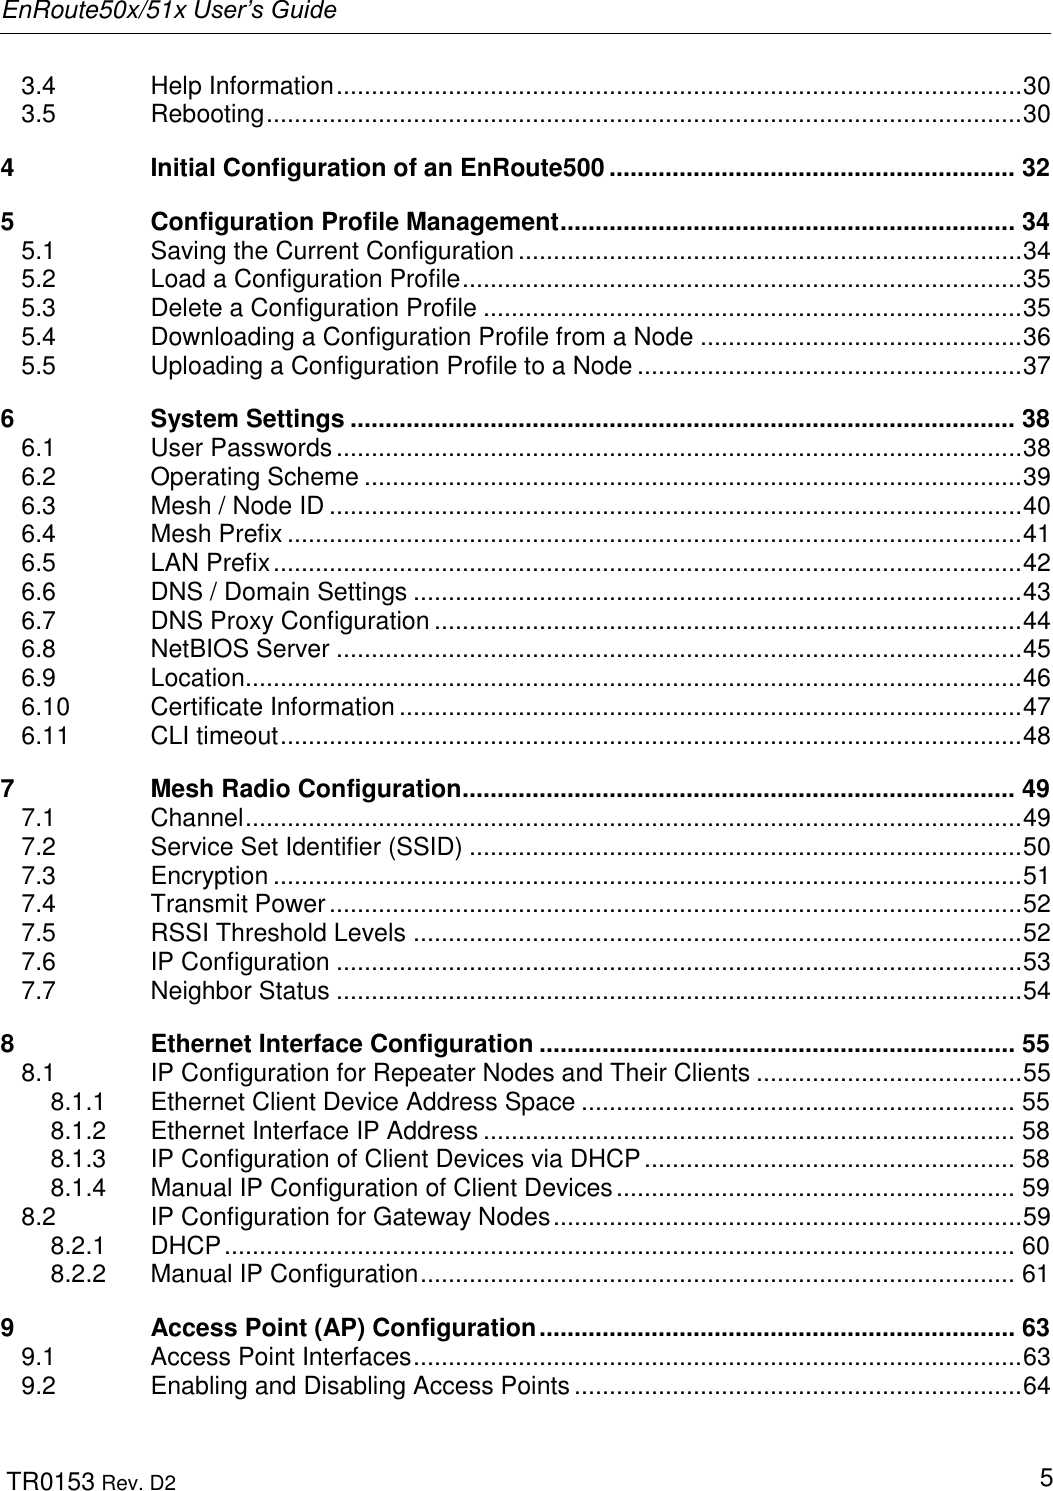 EnRoute50x/51x User’s Guide  TR0153 Rev. D2   5 3.4 Help Information .................................................................................................. 30 3.5 Rebooting ............................................................................................................ 30 4 Initial Configuration of an EnRoute500 .......................................................... 32 5 Configuration Profile Management ................................................................. 34 5.1 Saving the Current Configuration ........................................................................ 34 5.2 Load a Configuration Profile ................................................................................ 35 5.3 Delete a Configuration Profile ............................................................................. 35 5.4 Downloading a Configuration Profile from a Node .............................................. 36 5.5 Uploading a Configuration Profile to a Node ....................................................... 37 6 System Settings ............................................................................................... 38 6.1 User Passwords .................................................................................................. 38 6.2 Operating Scheme .............................................................................................. 39 6.3 Mesh / Node ID ................................................................................................... 40 6.4 Mesh Prefix ......................................................................................................... 41 6.5 LAN Prefix ........................................................................................................... 42 6.6 DNS / Domain Settings ....................................................................................... 43 6.7 DNS Proxy Configuration .................................................................................... 44 6.8 NetBIOS Server .................................................................................................. 45 6.9 Location............................................................................................................... 46 6.10 Certificate Information ......................................................................................... 47 6.11 CLI timeout .......................................................................................................... 48 7 Mesh Radio Configuration ............................................................................... 49 7.1 Channel ............................................................................................................... 49 7.2 Service Set Identifier (SSID) ............................................................................... 50 7.3 Encryption ........................................................................................................... 51 7.4 Transmit Power ................................................................................................... 52 7.5 RSSI Threshold Levels ....................................................................................... 52 7.6 IP Configuration .................................................................................................. 53 7.7 Neighbor Status .................................................................................................. 54 8 Ethernet Interface Configuration .................................................................... 55 8.1 IP Configuration for Repeater Nodes and Their Clients ...................................... 55 8.1.1 Ethernet Client Device Address Space .............................................................. 55 8.1.2 Ethernet Interface IP Address ............................................................................ 58 8.1.3 IP Configuration of Client Devices via DHCP ..................................................... 58 8.1.4 Manual IP Configuration of Client Devices ......................................................... 59 8.2 IP Configuration for Gateway Nodes ................................................................... 59 8.2.1 DHCP ................................................................................................................. 60 8.2.2 Manual IP Configuration ..................................................................................... 61 9 Access Point (AP) Configuration .................................................................... 63 9.1 Access Point Interfaces ....................................................................................... 63 9.2 Enabling and Disabling Access Points ................................................................ 64 